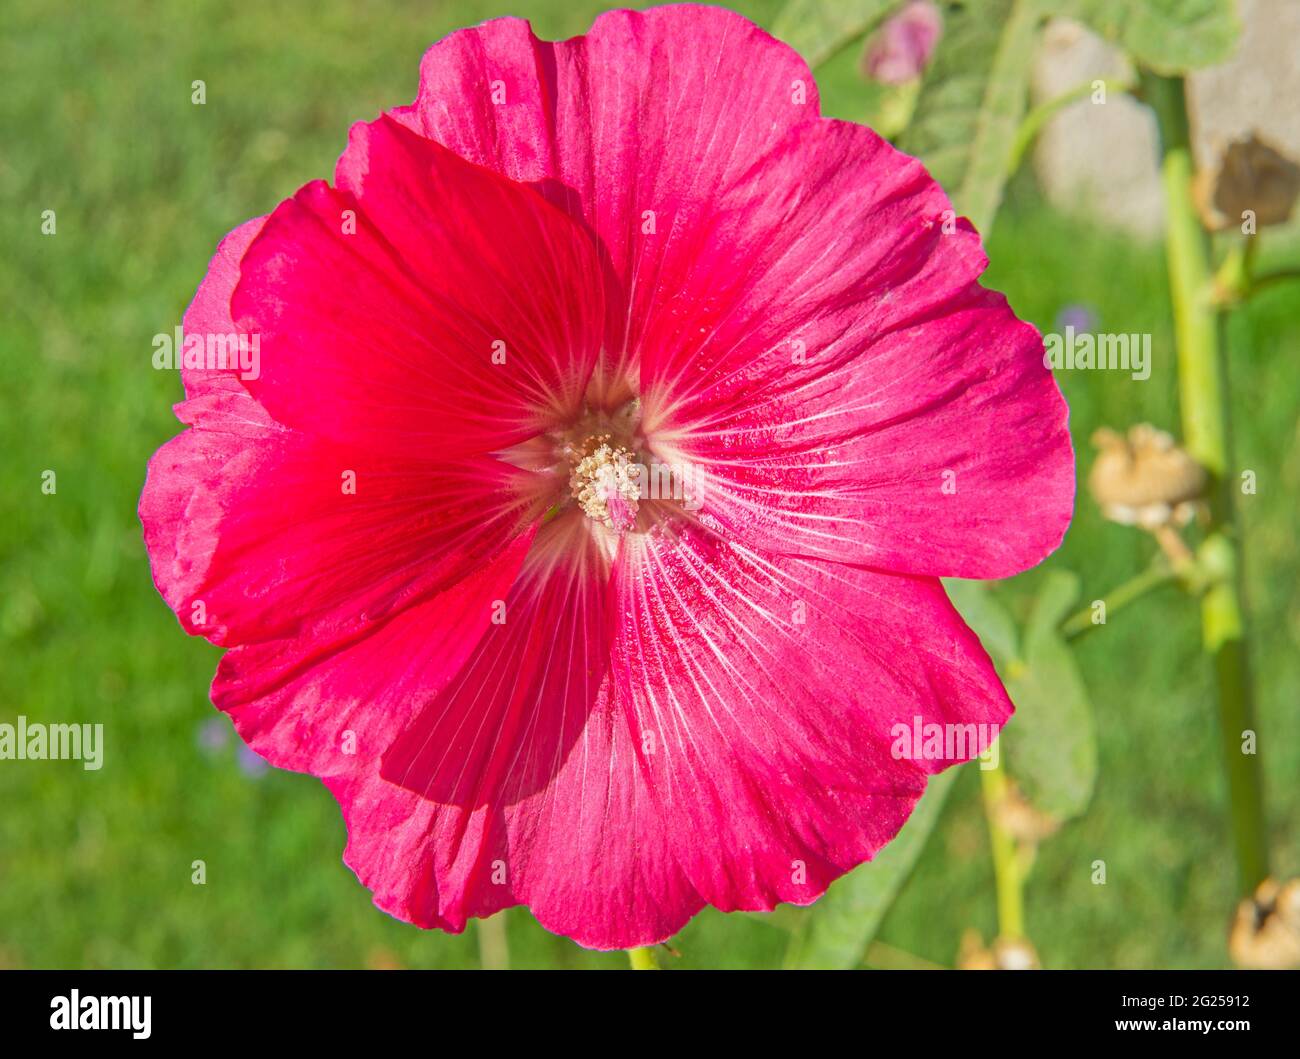 Close-up detail of a purple hibiscus flower petals and stigma in garden Stock Photo